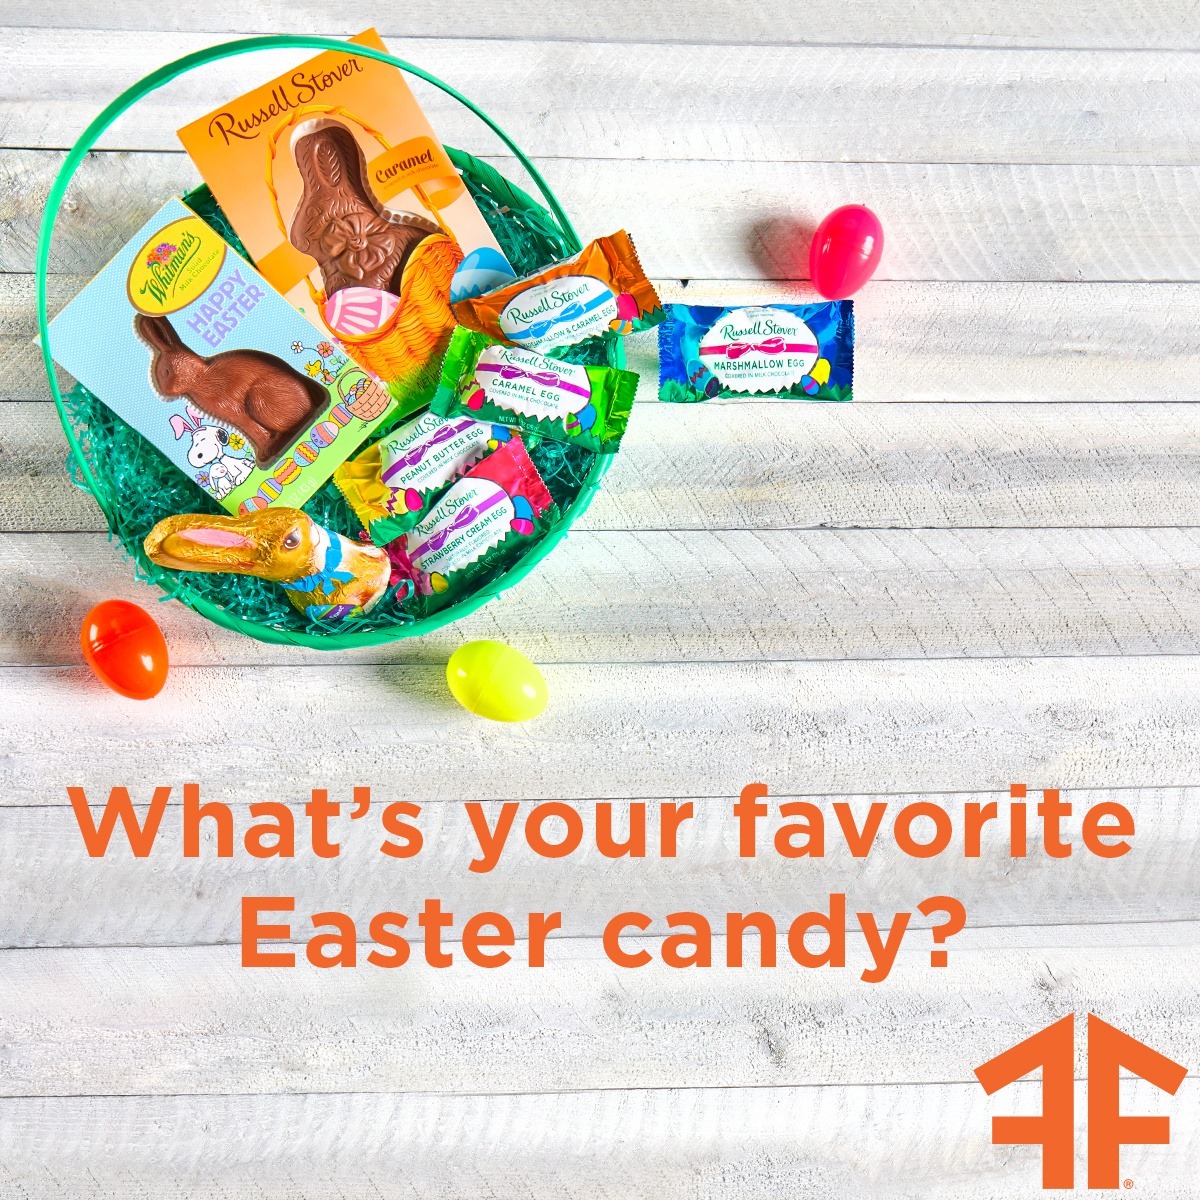 We all have our favorite. 🐰 Which ONE of these do you love the most